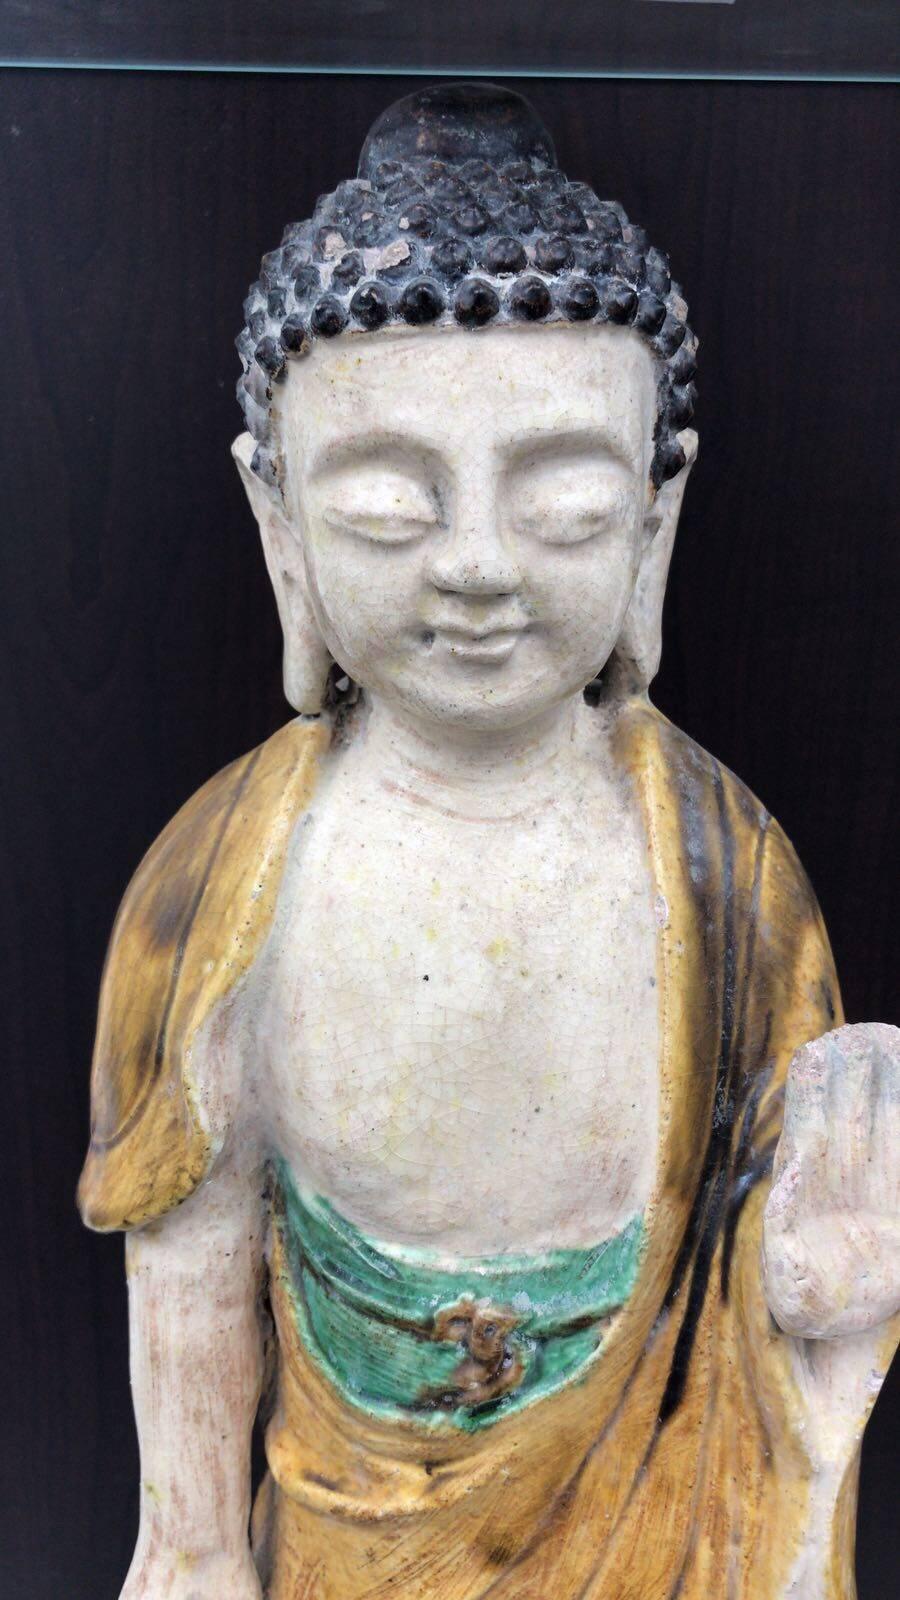 A Ming dynasty (1368-1644) standing Guan Yin Buddha. Yin is a shortened form of Guanshiyin which translates as 'observing the sounds of the world' Guan Yin was venerated by East Asian Buddhist. This figure has been fully authenticated by a